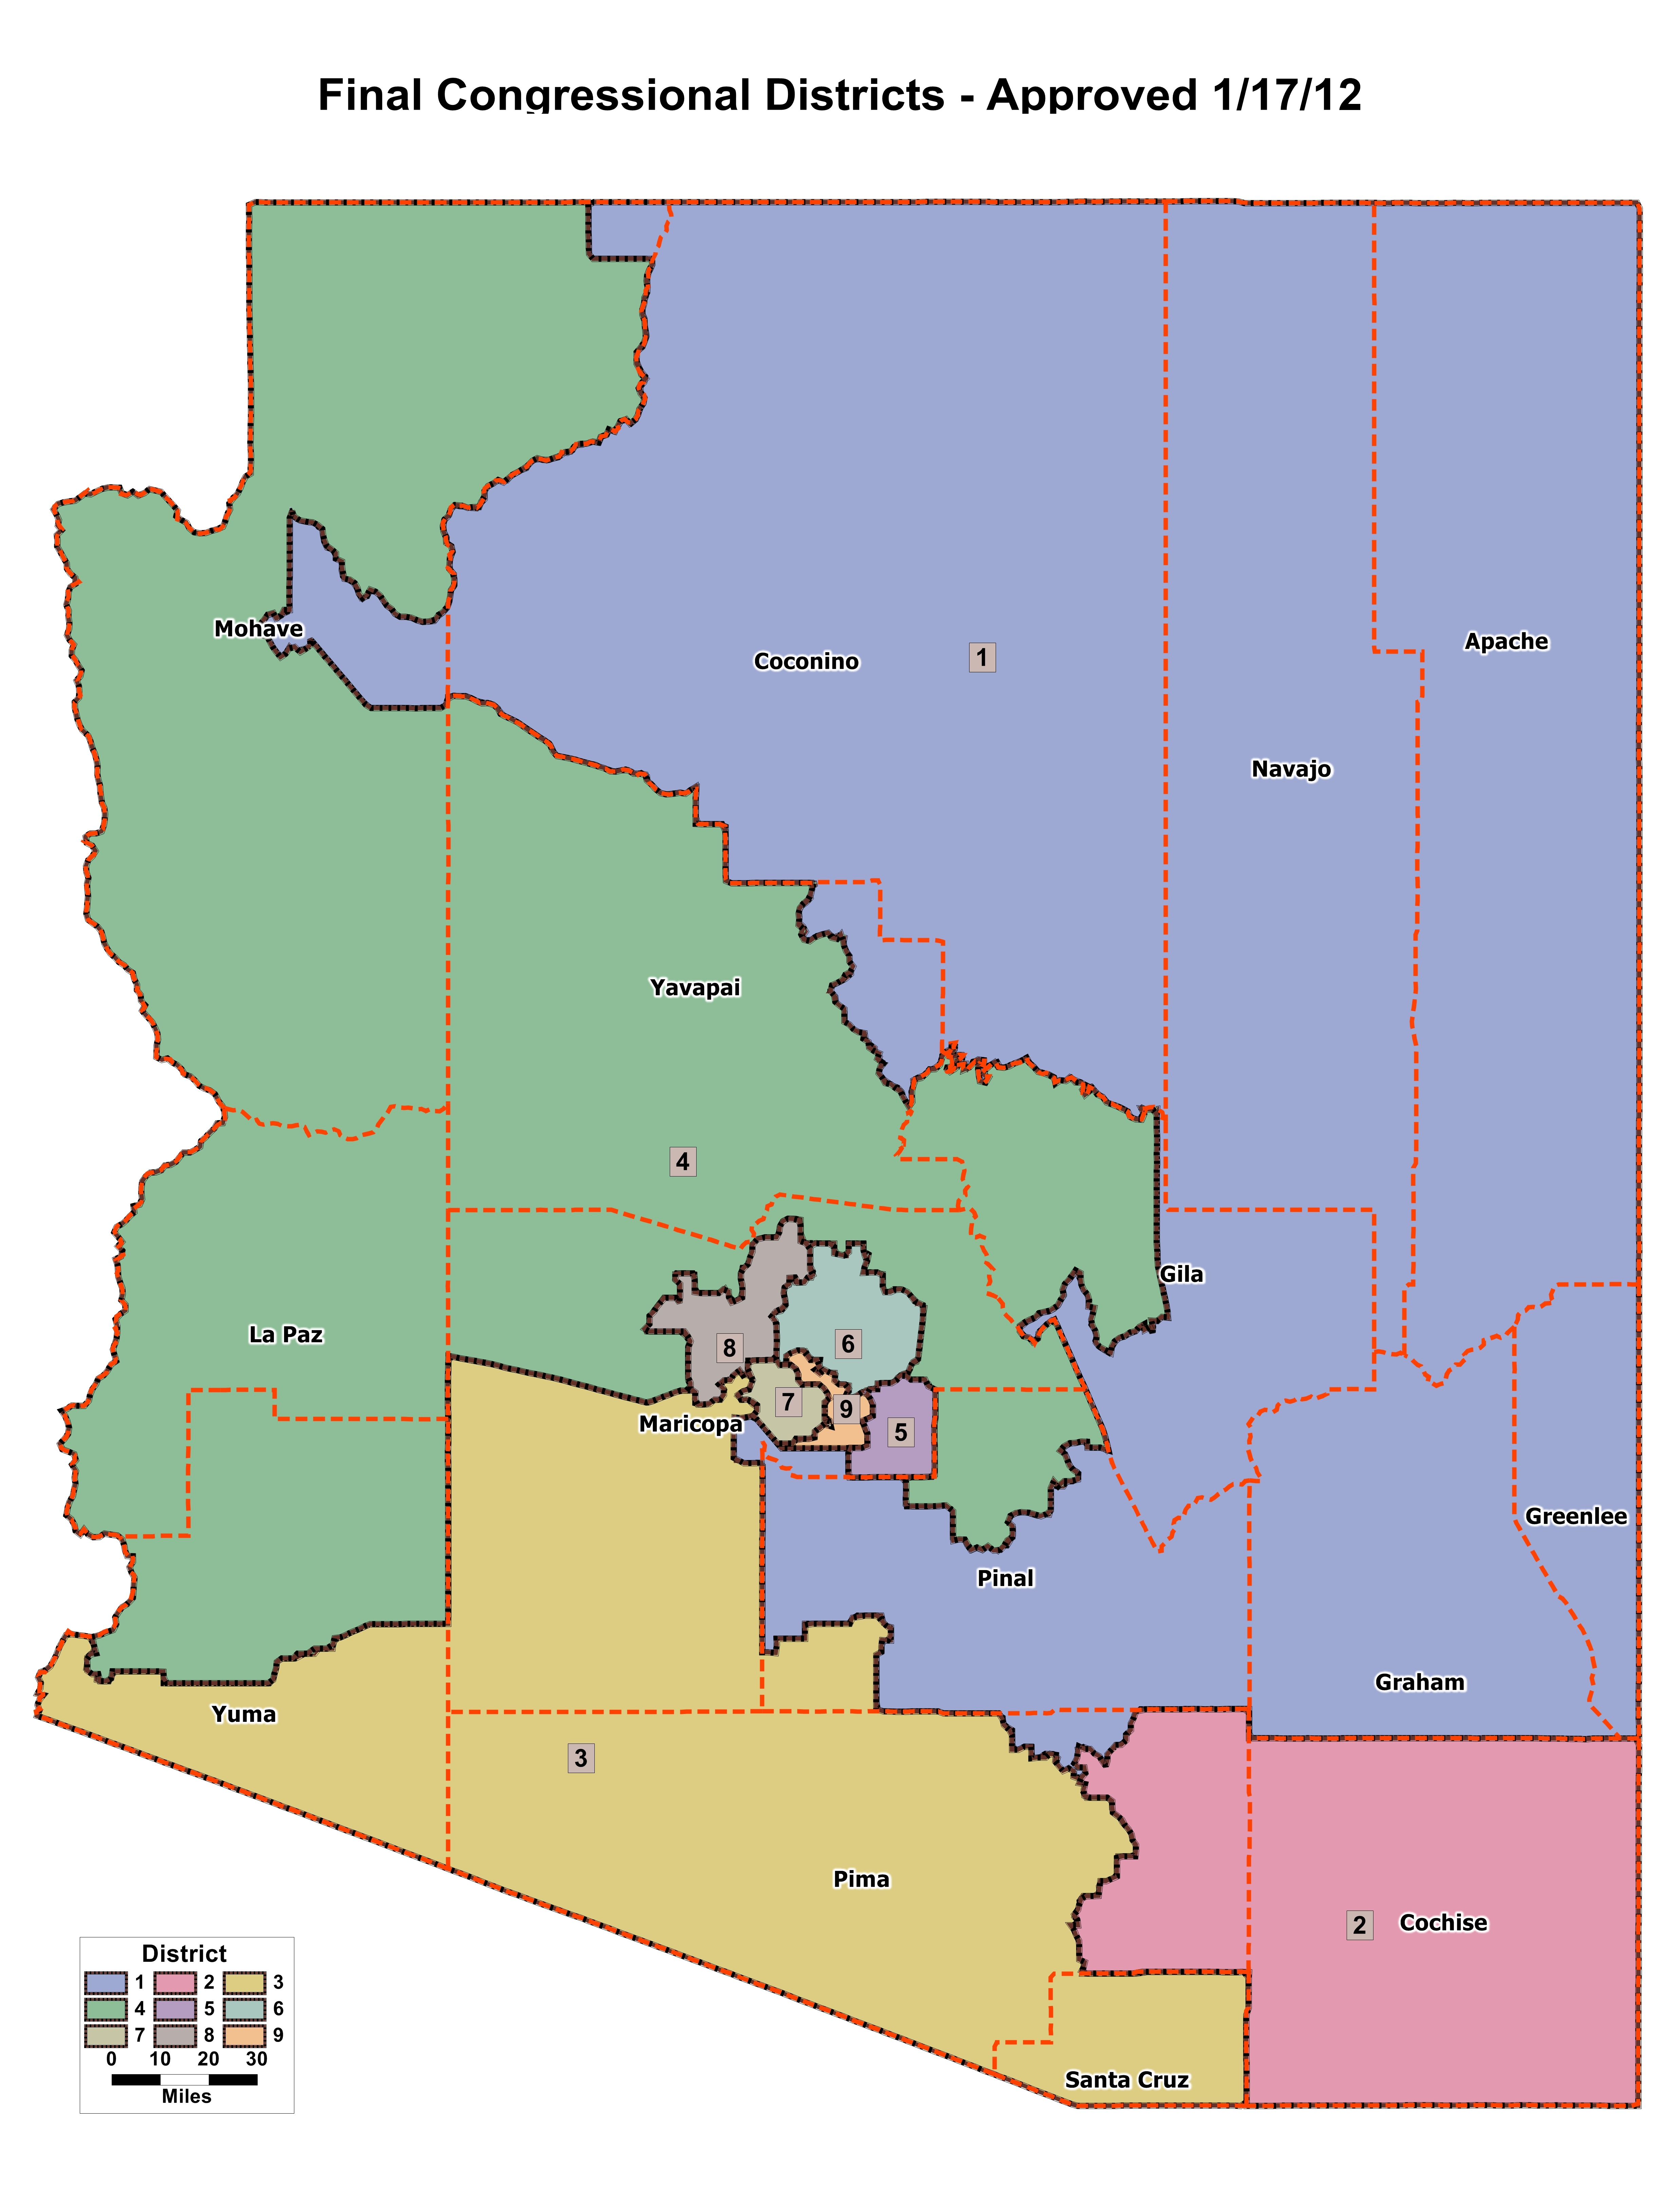 Final-Congressional-Districts-Statewide-8x11